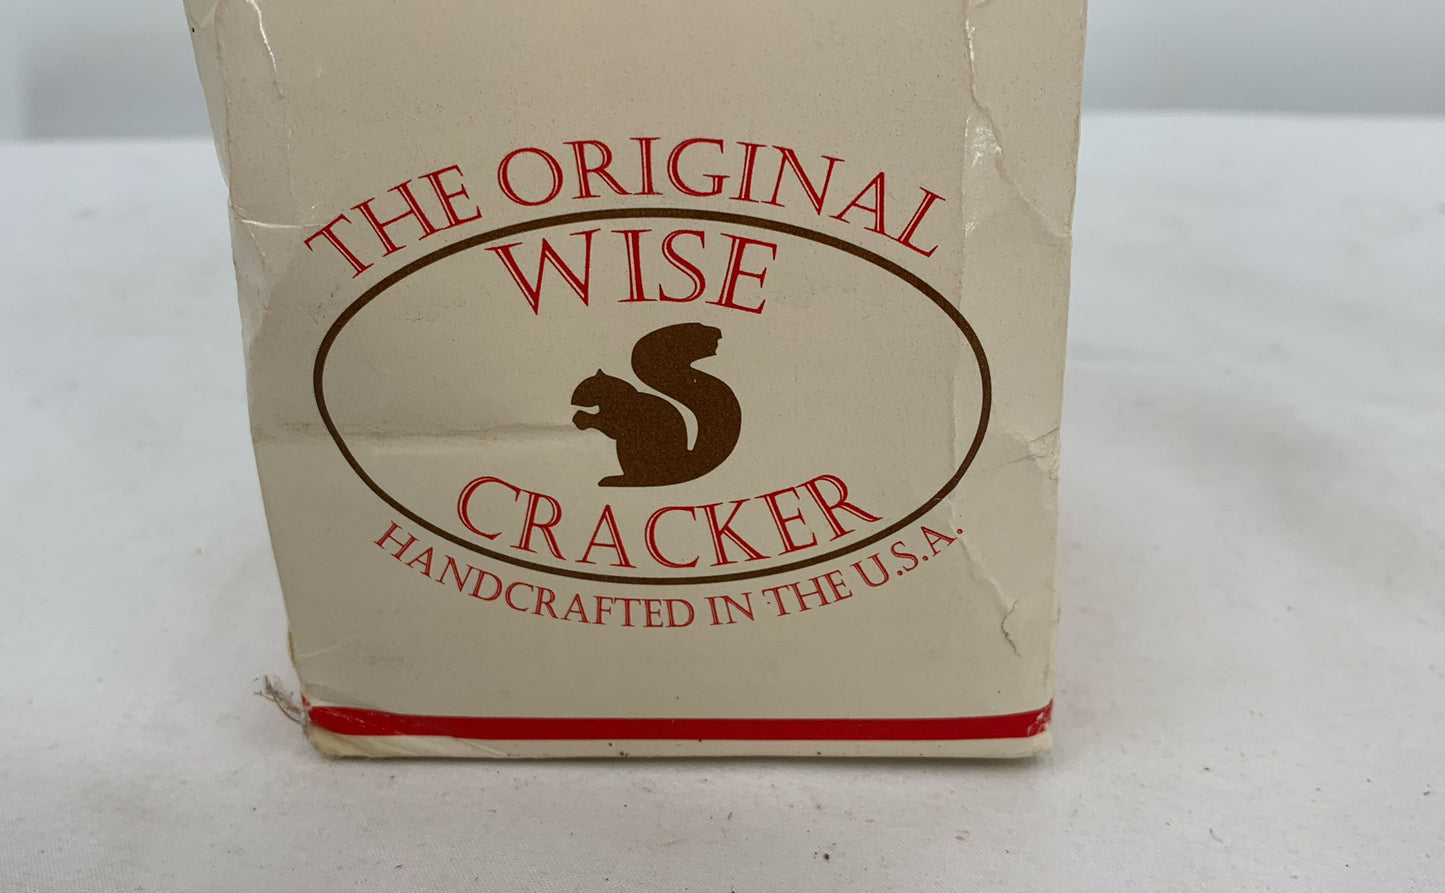 The Original Wise Cracker Pecan Nut Cracker Handcrafted In The U.S.A.